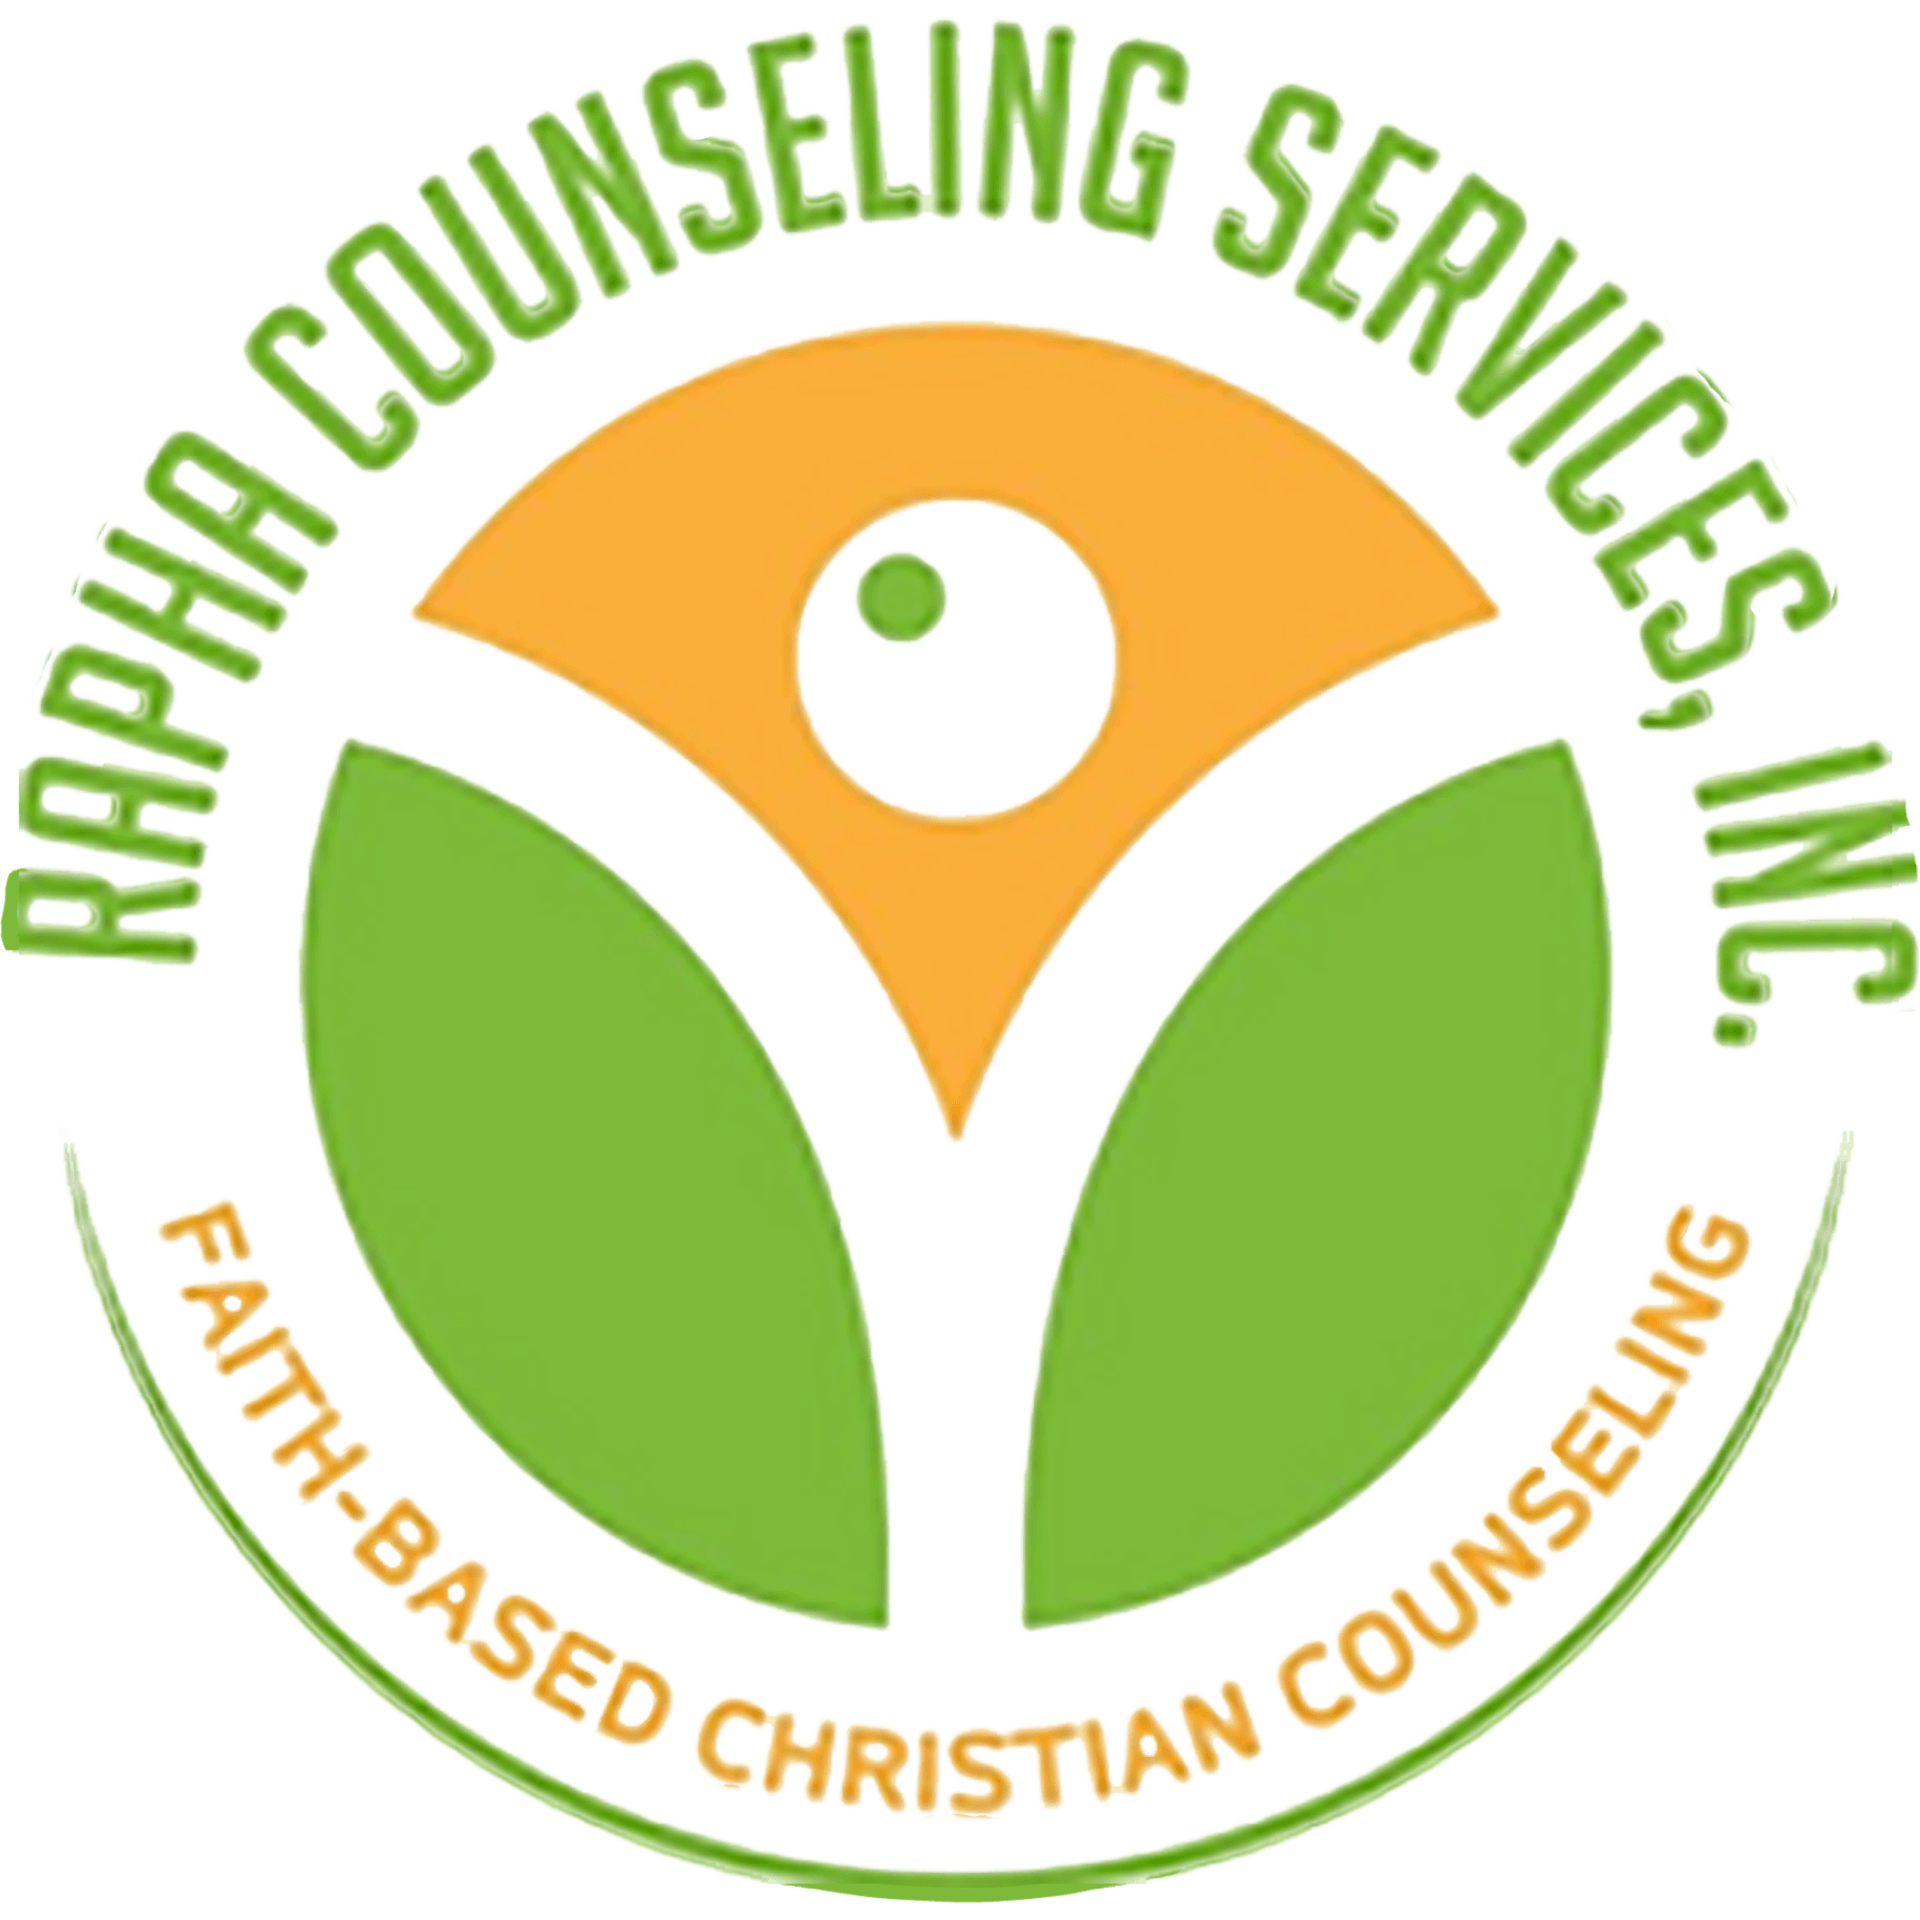 rapha counseling services inc logo